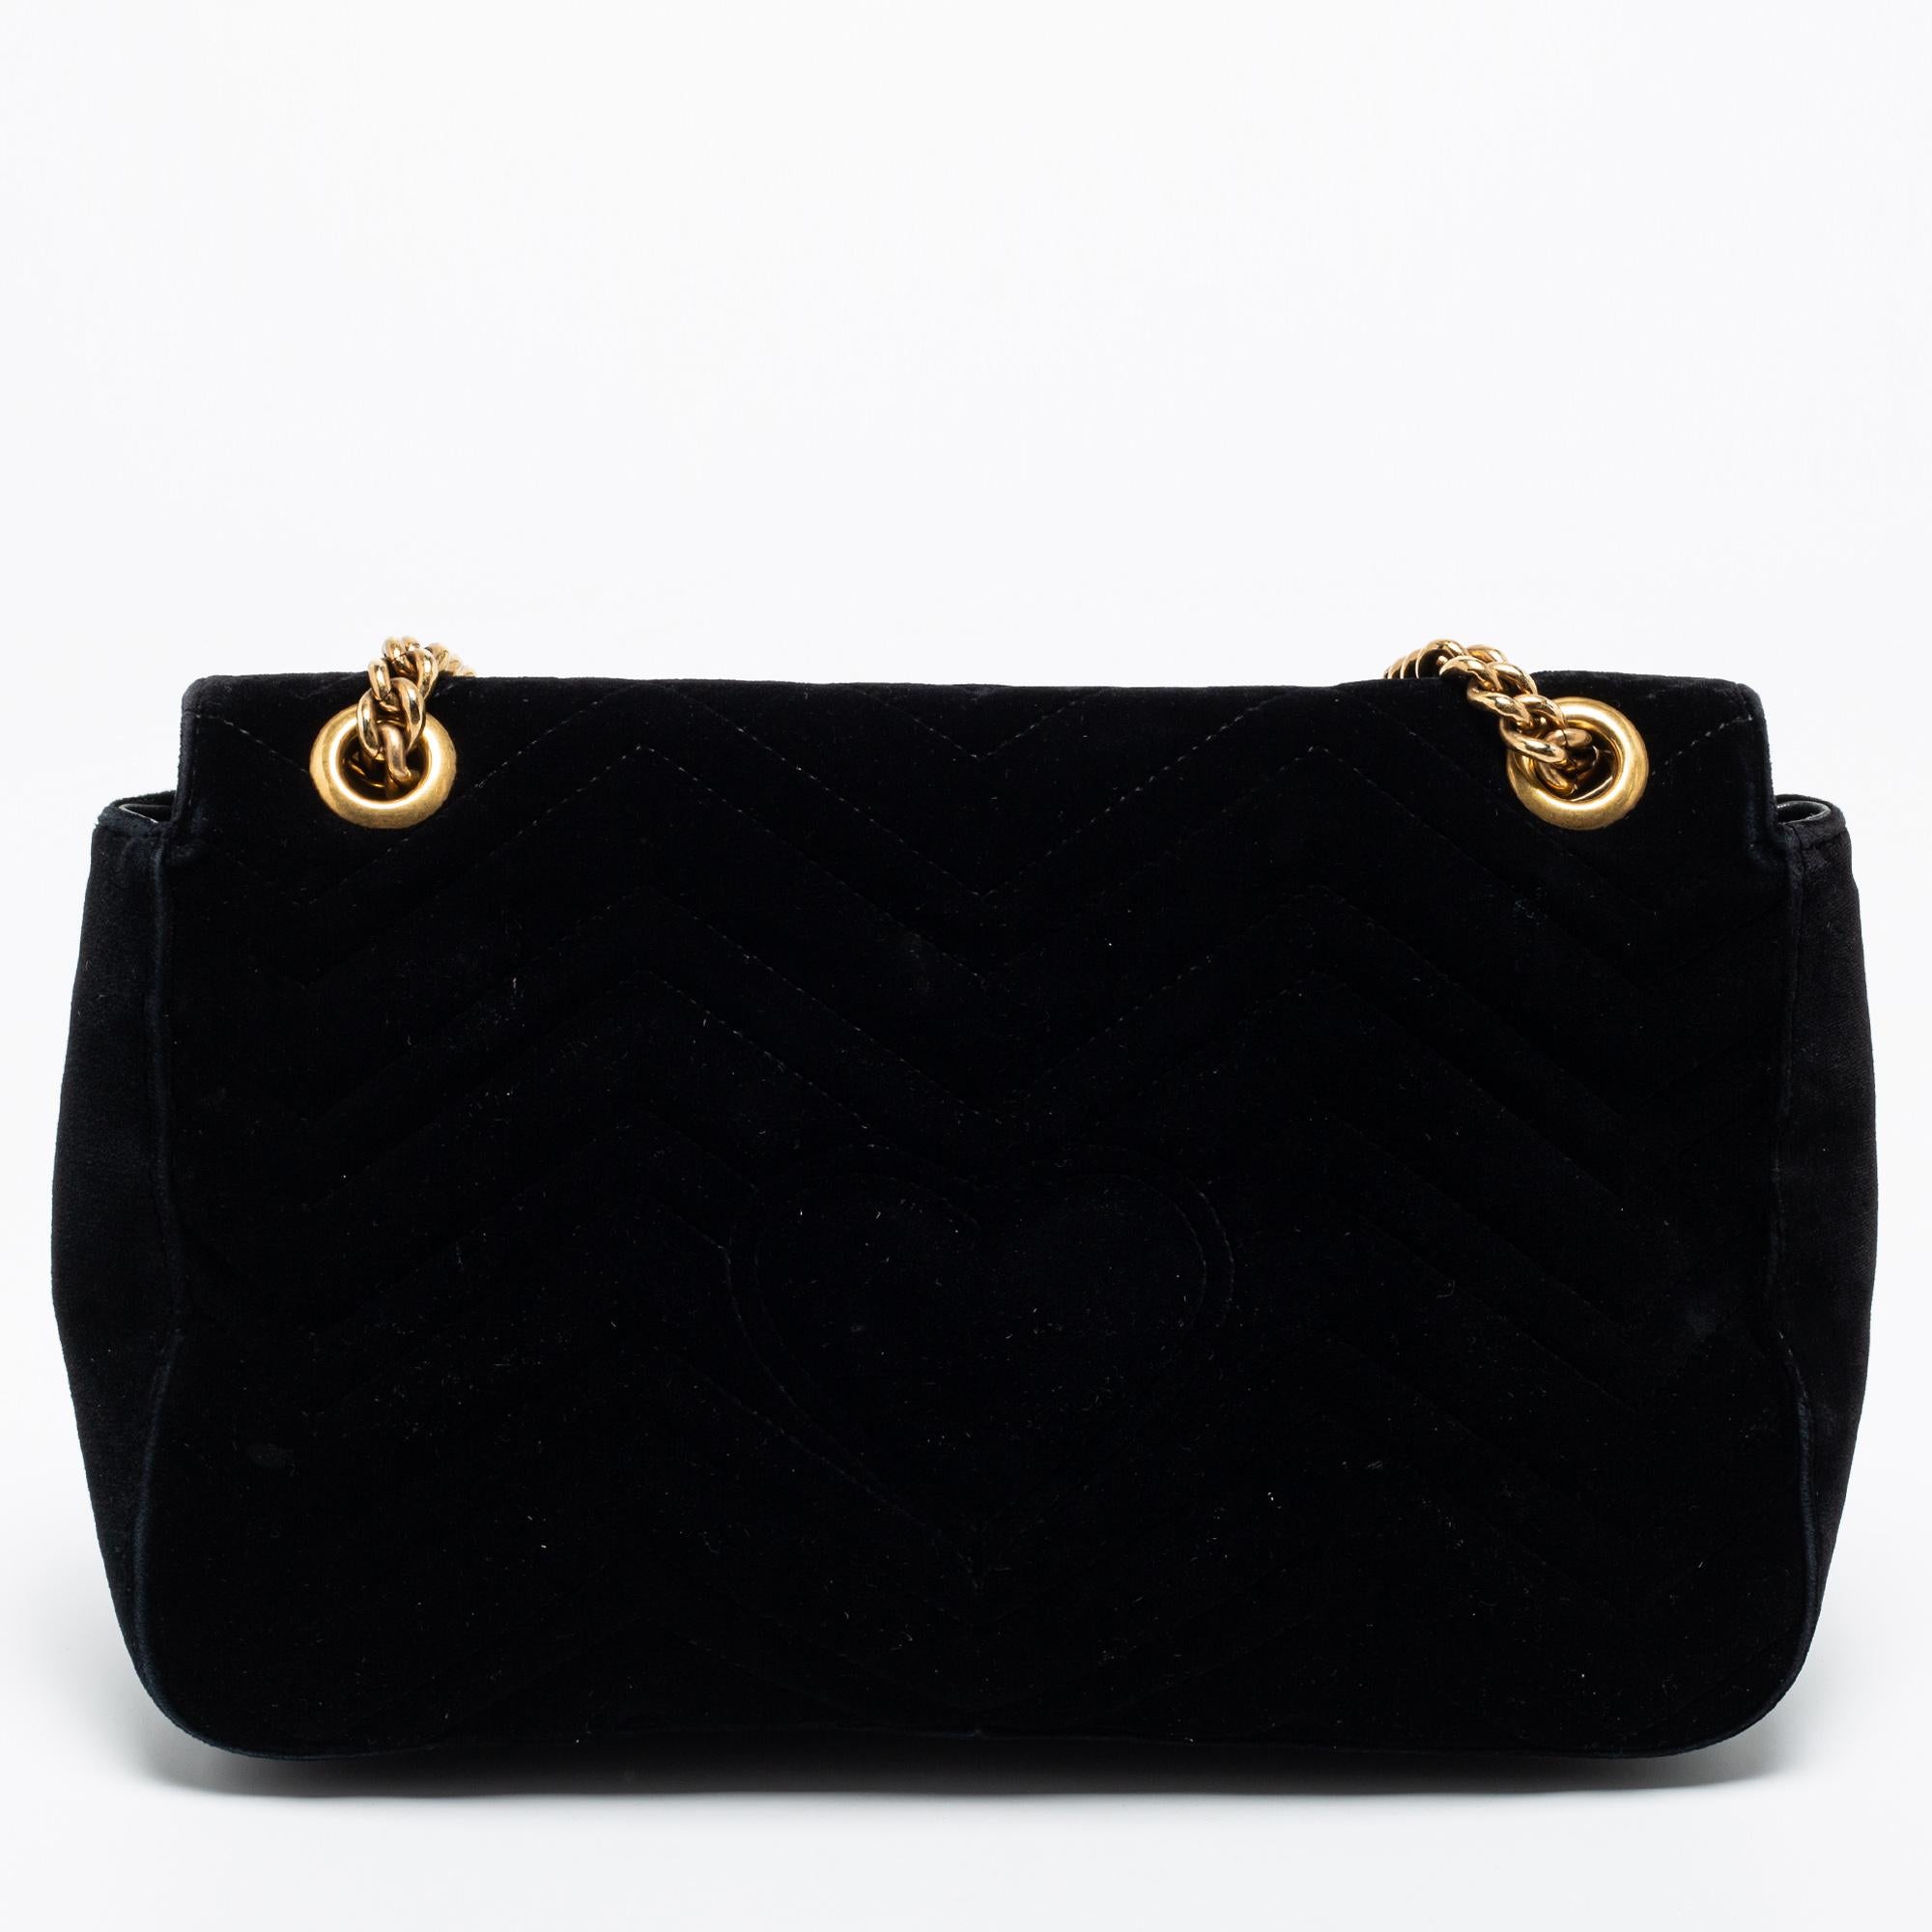 This Gucci GG Marmont shoulder bag is a timeless piece to last you season after season. This bag is made of black Matelassé velvet and will suit all your needs. It has GG logo detailing, a long shoulder strap, and a satin-lined interior.

